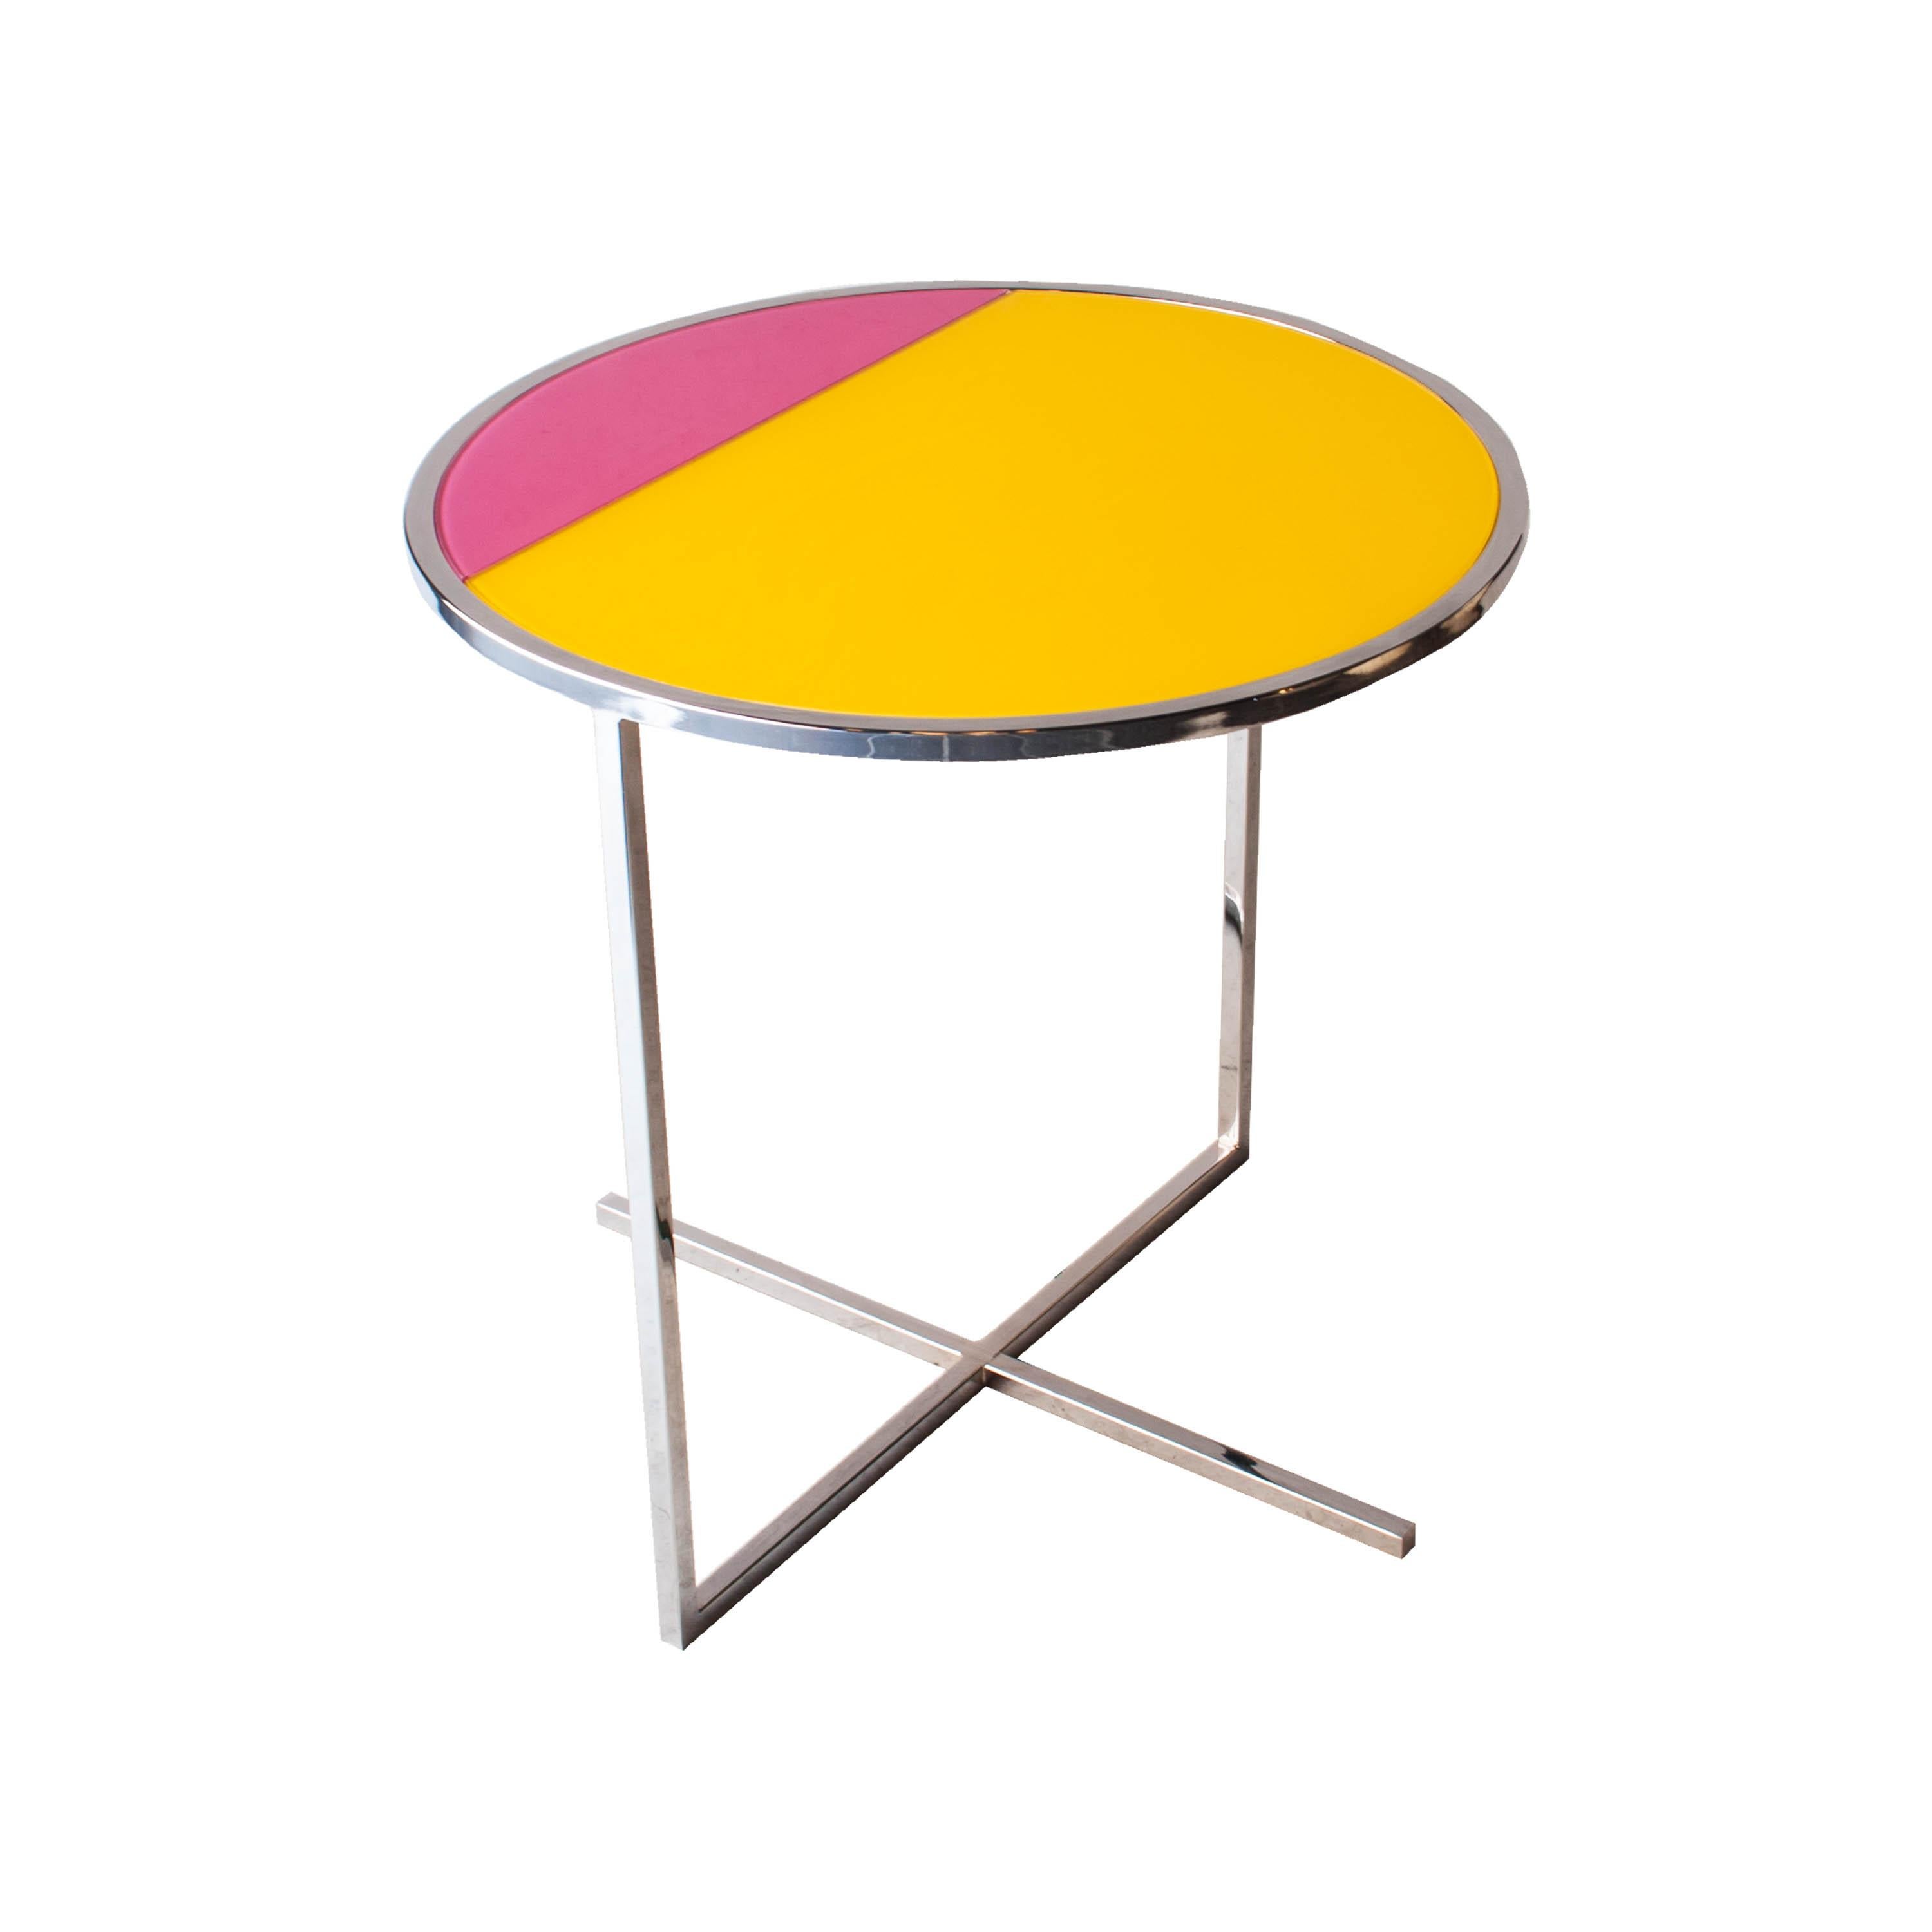 Spanish IKB 191 Contemporary Circular Chrome Glass Pink Blue Center Table, Spain, 2019